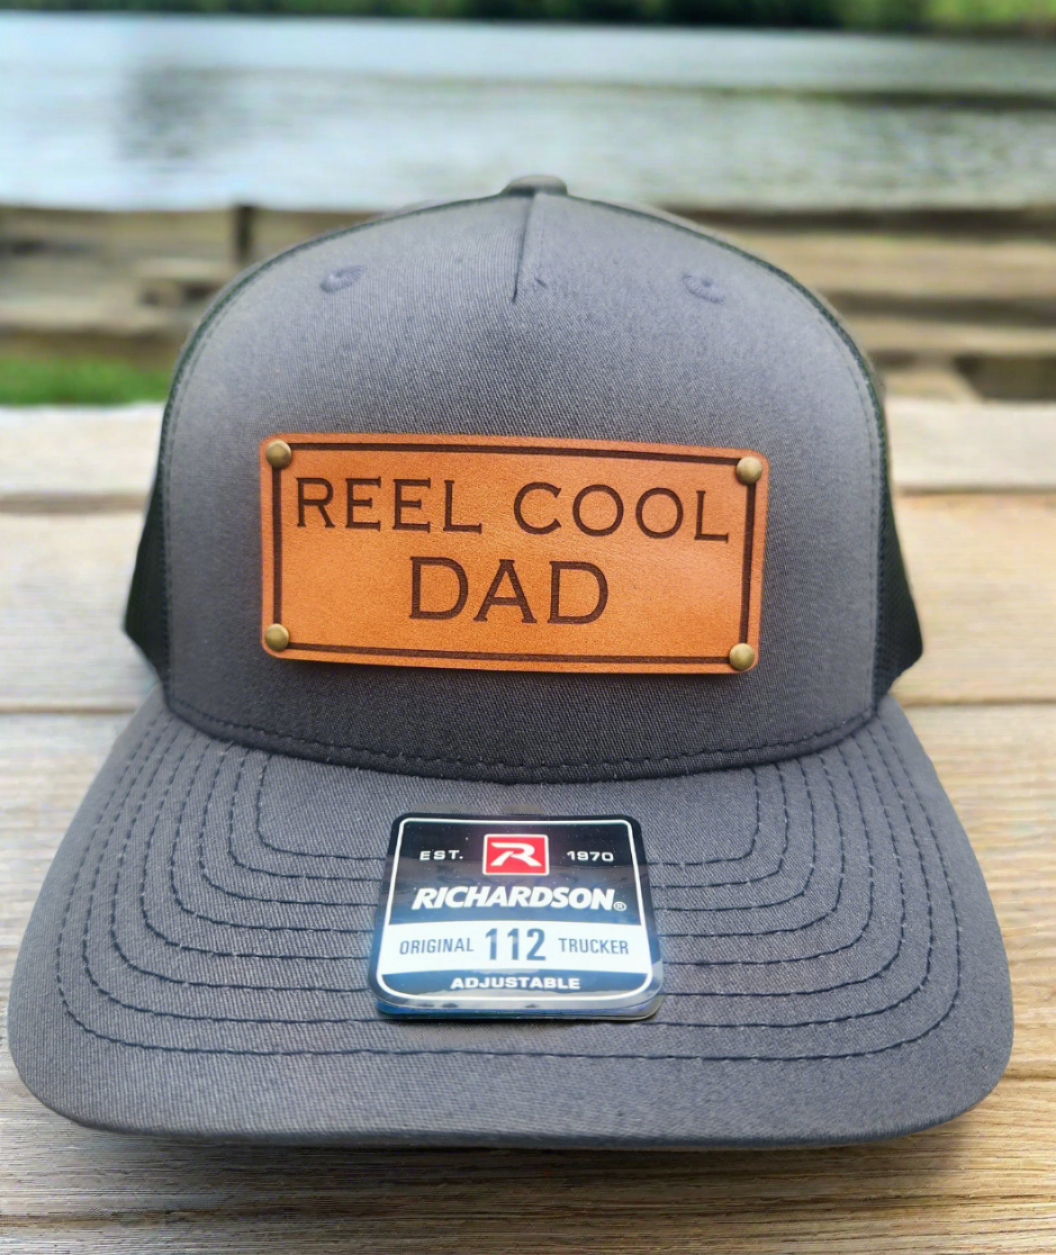 REEL COOL DAD hat - Fishing hat - hat for dad